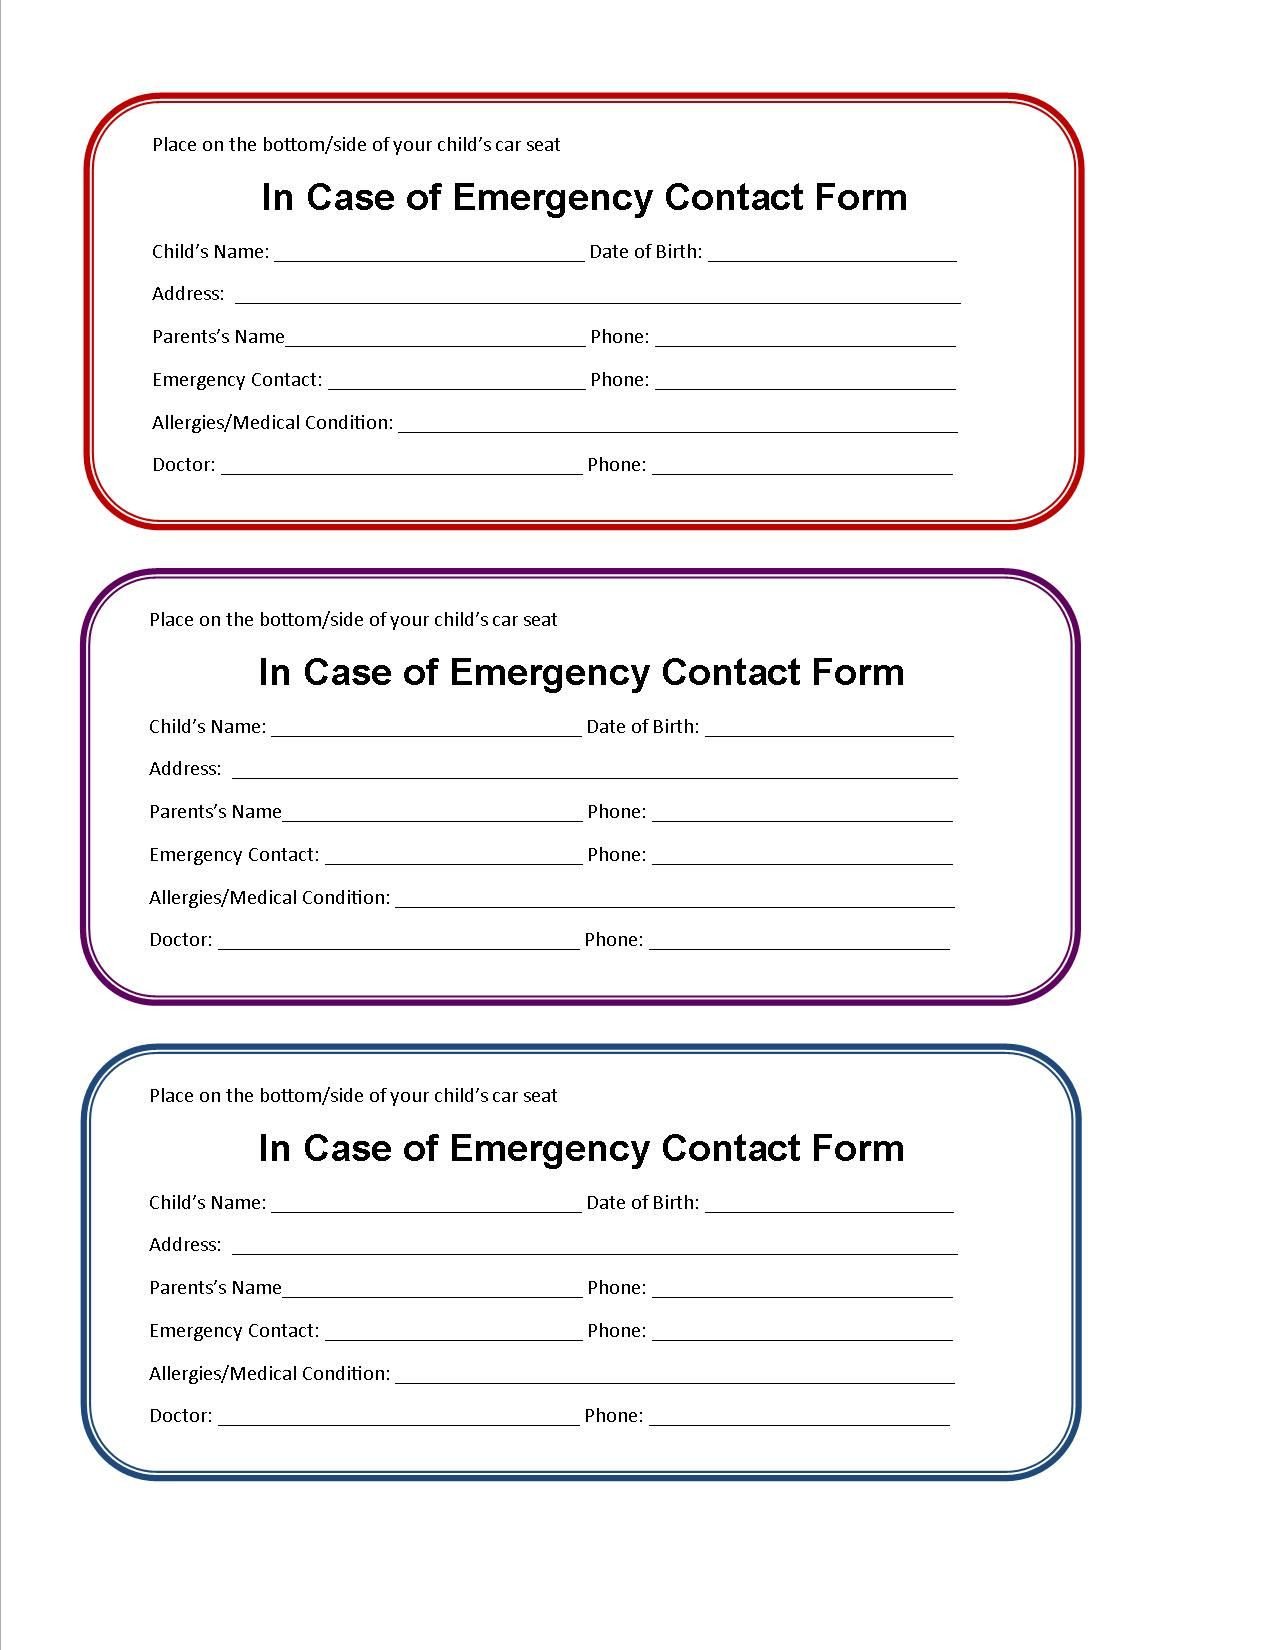 printable emergency contact form for car seat